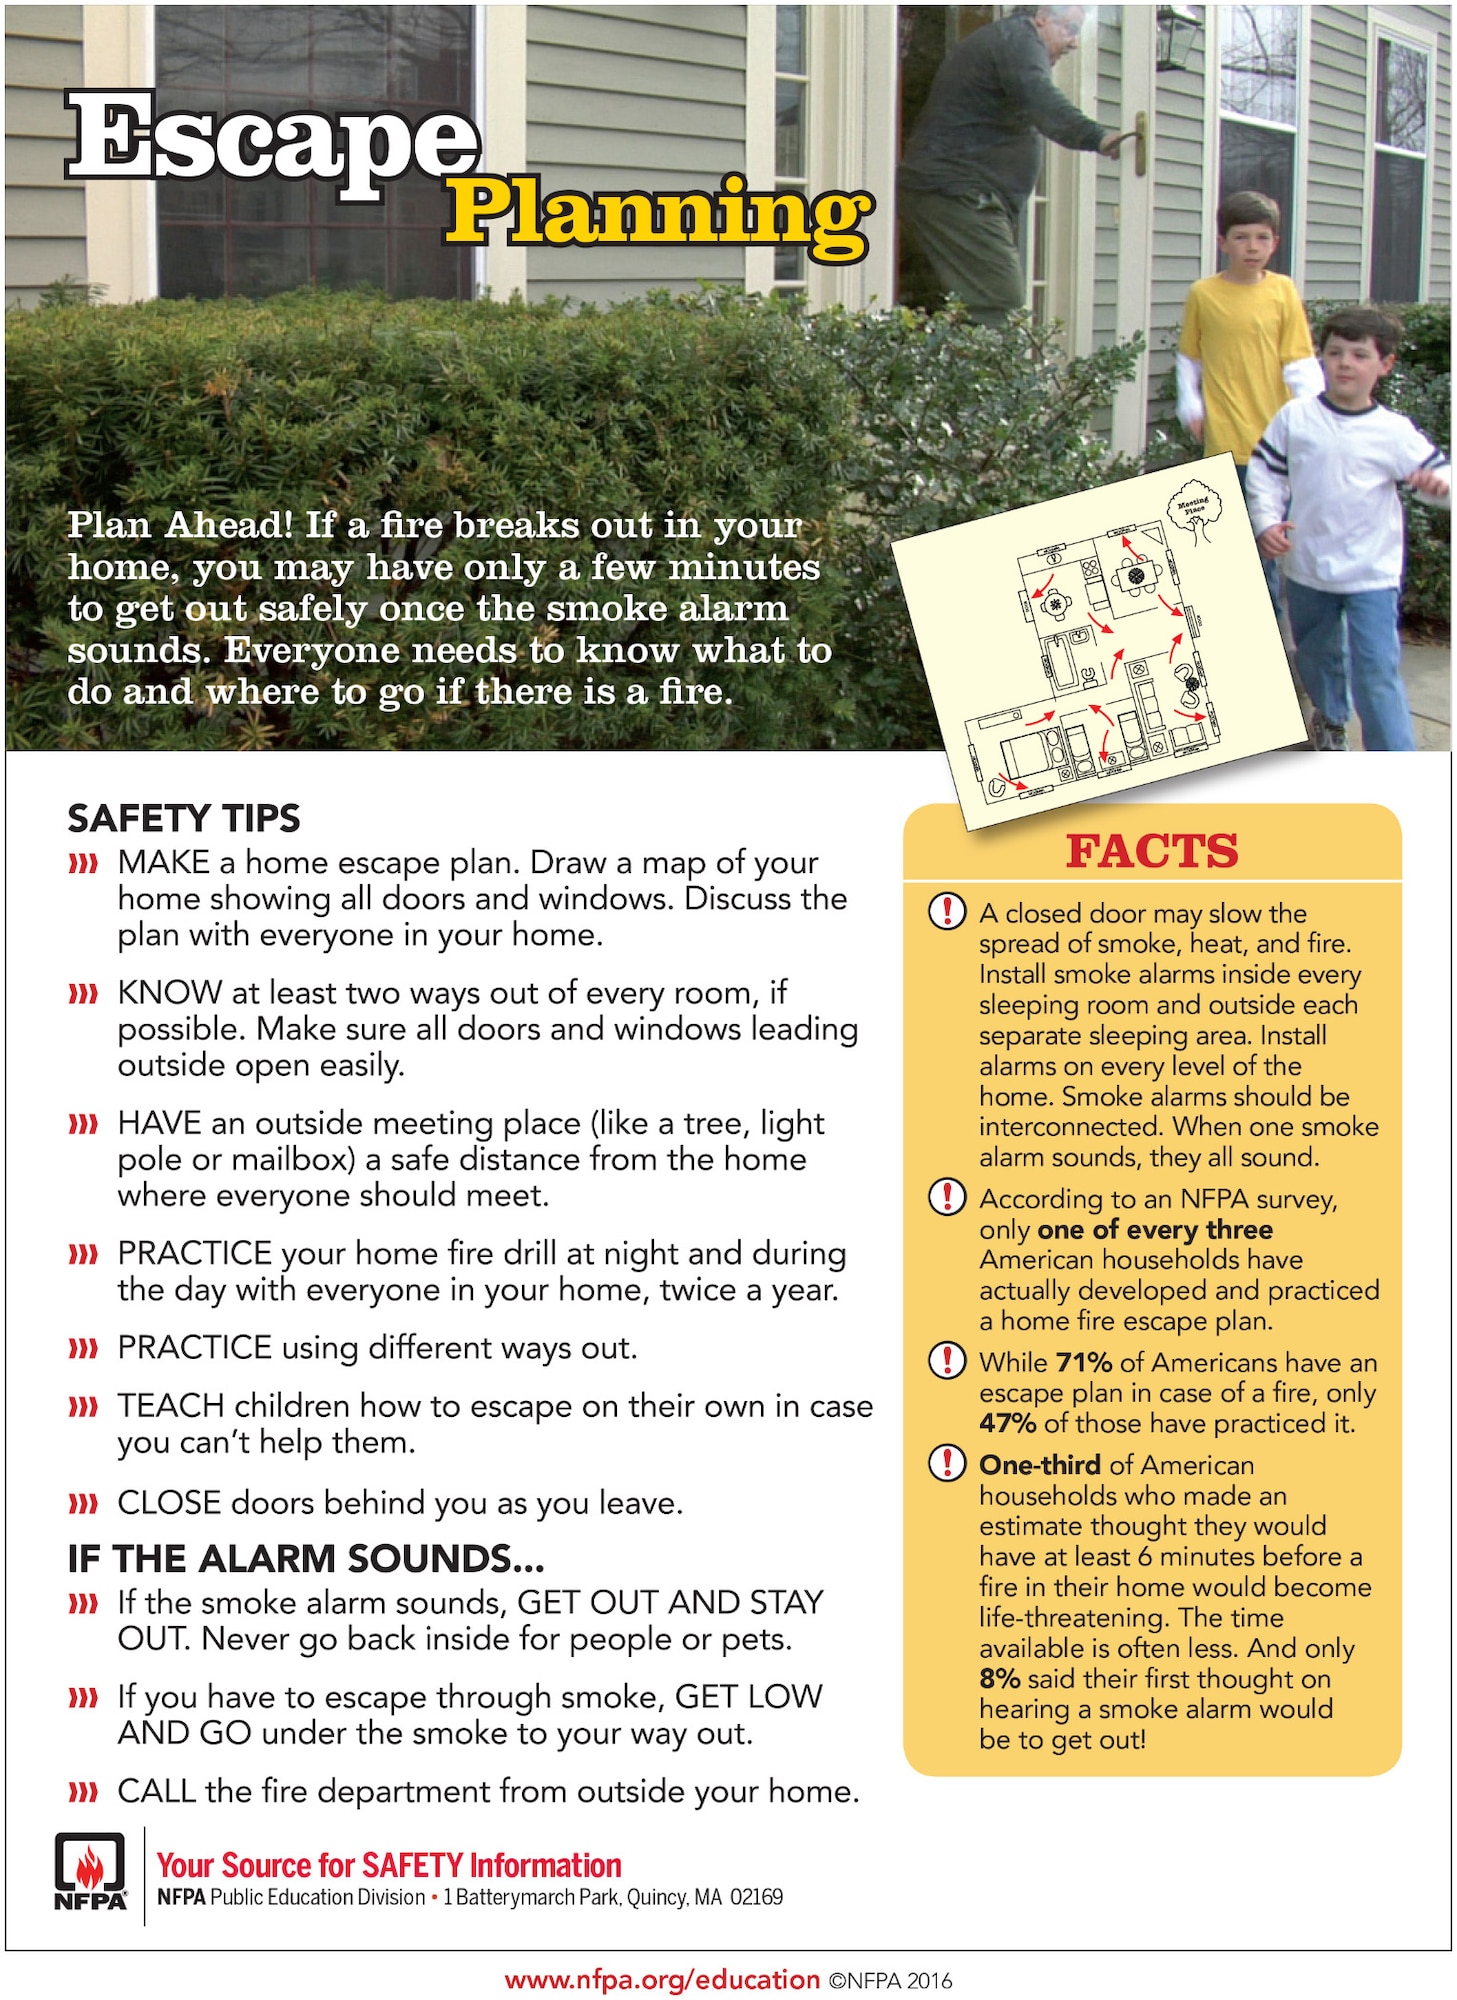 For more information about fire escape planning, visit the National Fire Prevention Association website at www.nfpa.org/education or contact the Fire Prevention Offices at JBSA-Fort Sam Houston at 210-221-2727, JBSA-Lackland at 210-671-2921, or JBSA-Randolph at 210-652-6915.